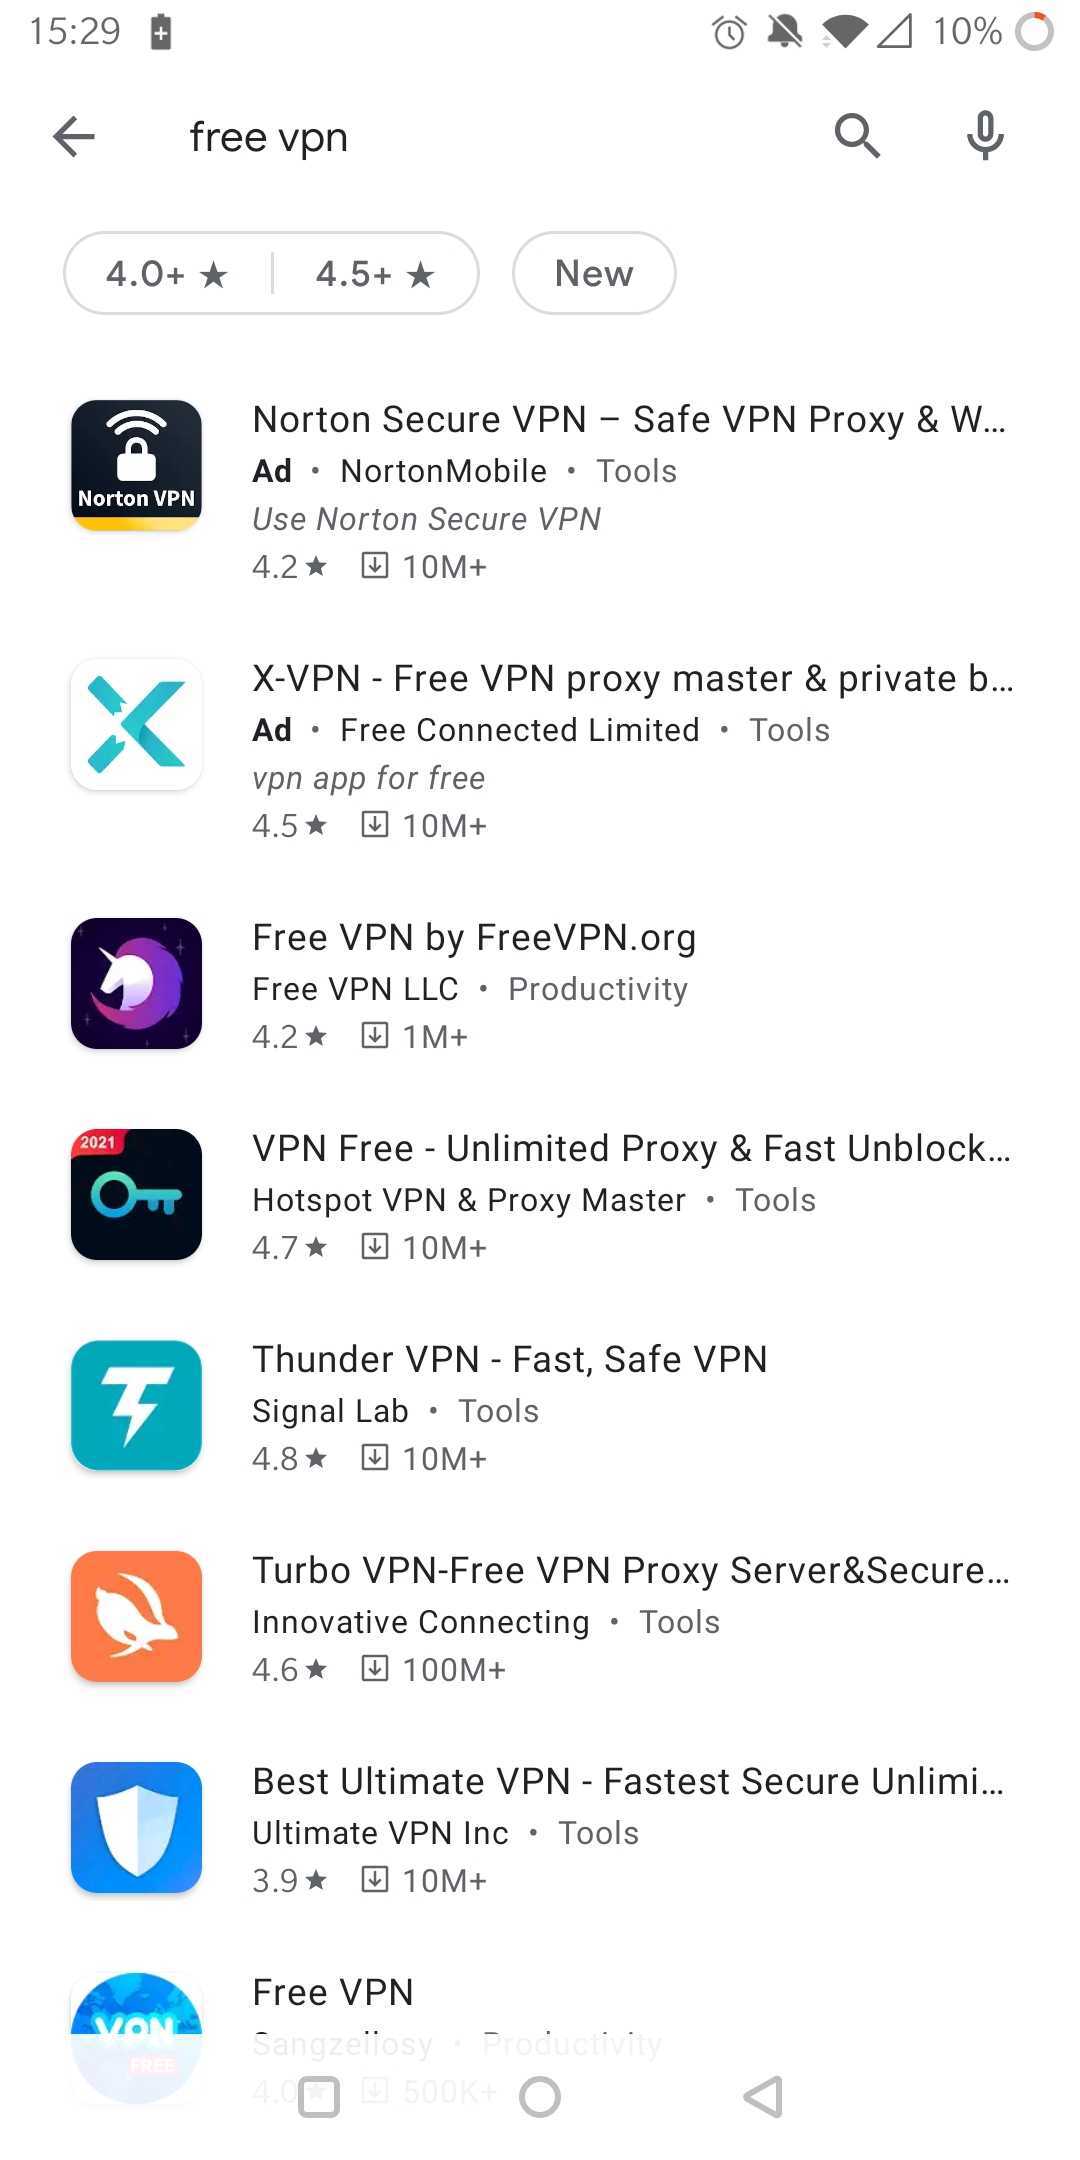 free VPNs on the Google Play Store